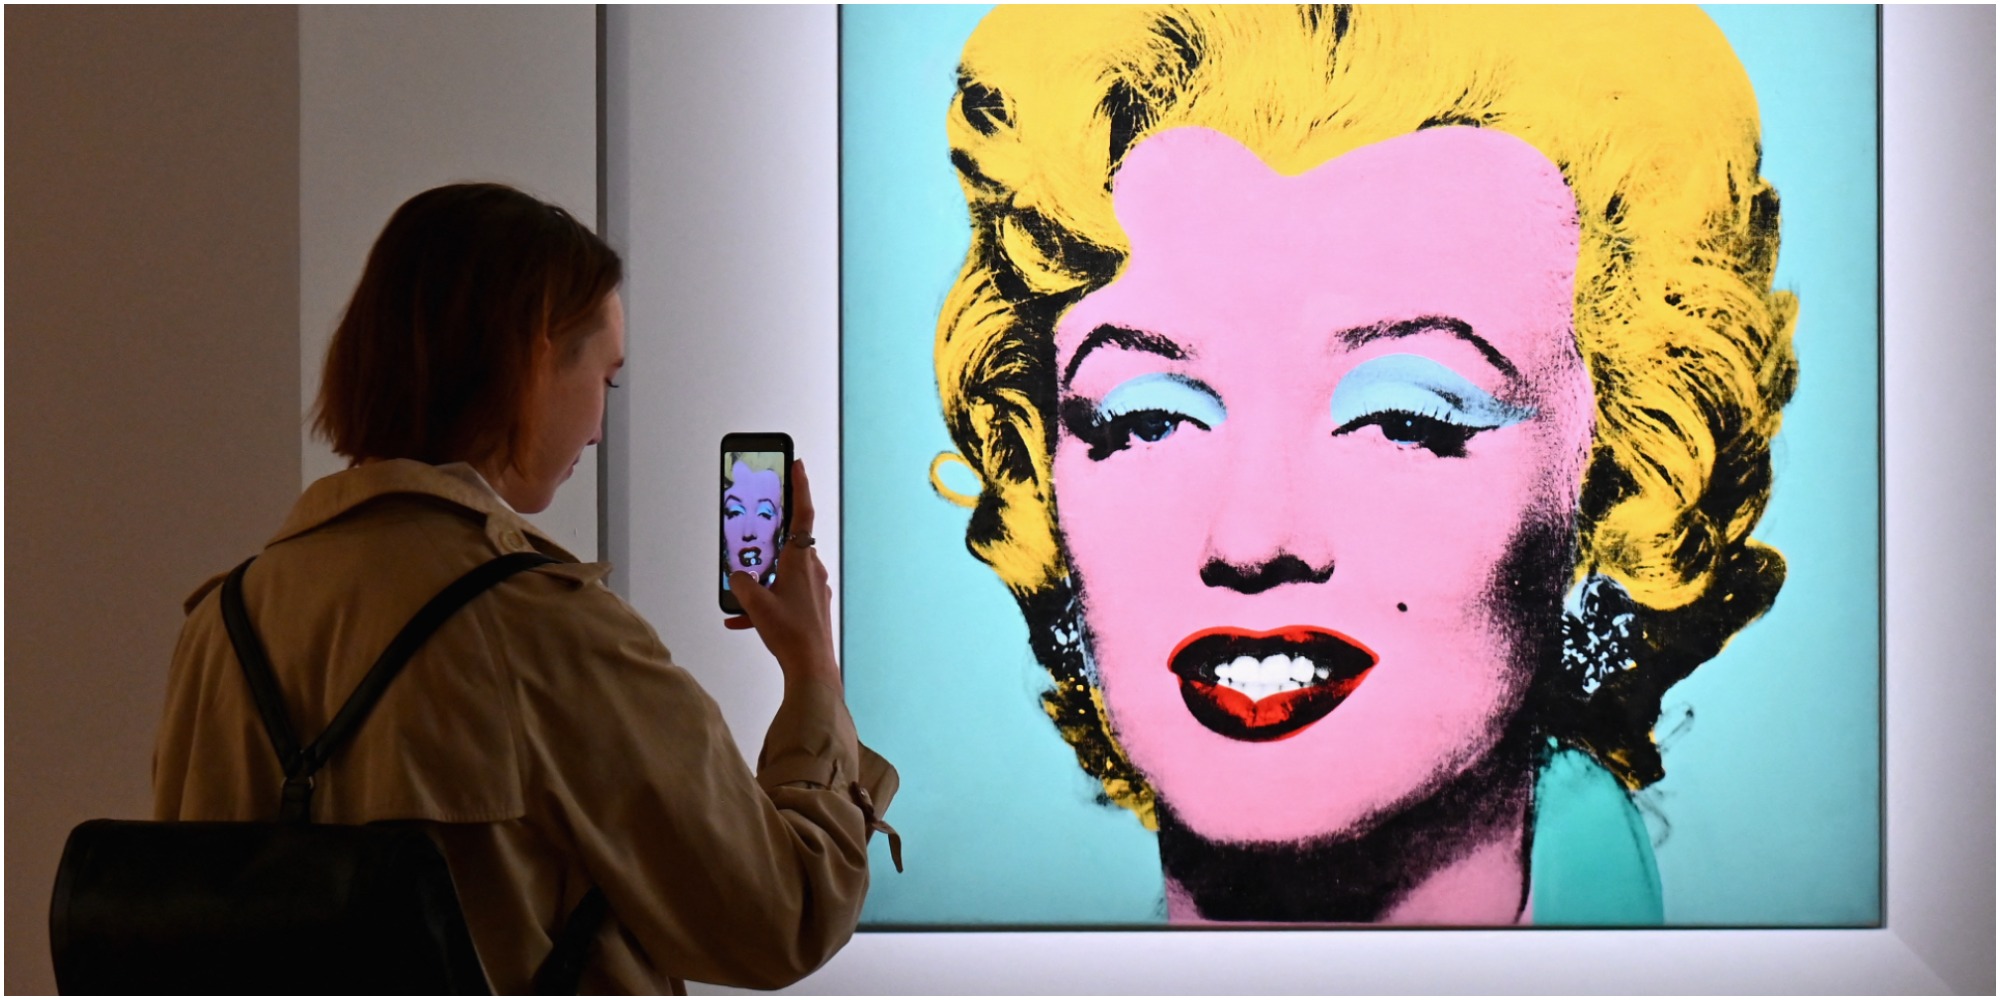 Andy Warhol's Shot Sage Blue Marilyn Painting at Christie's in New York City.